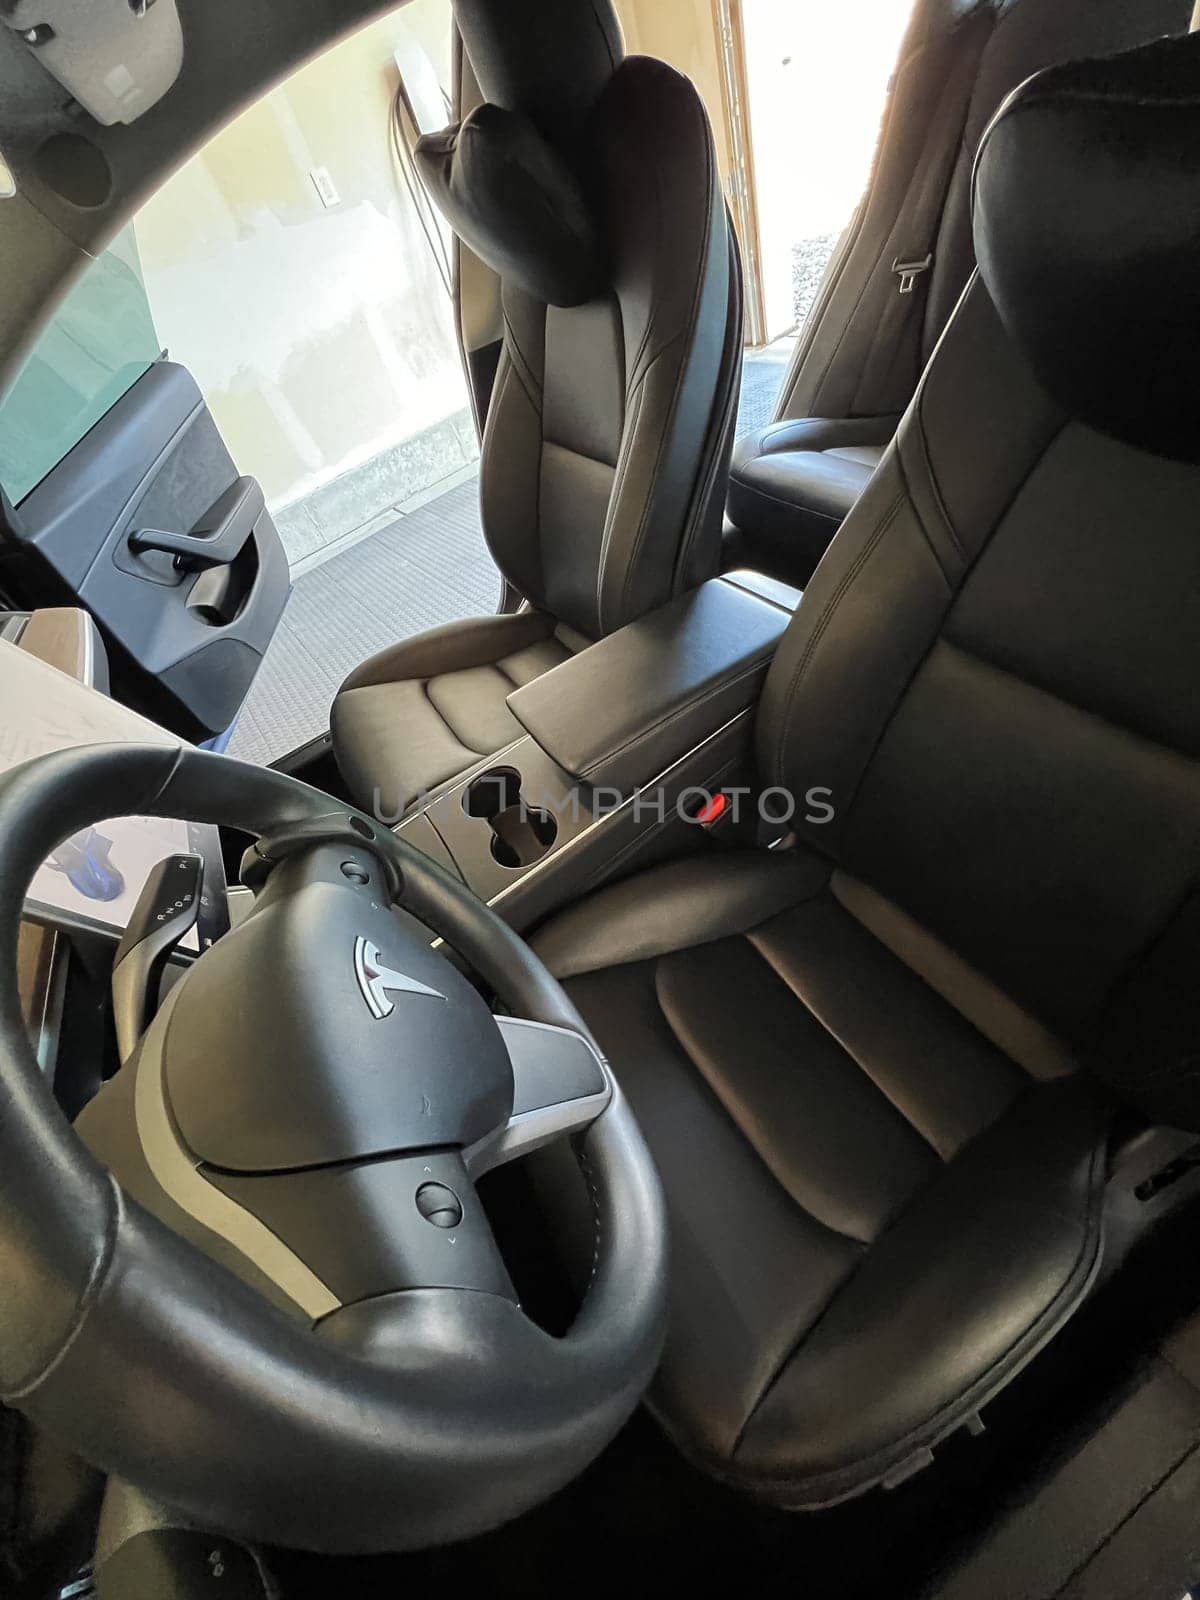 Detailed Interior Cleaning of a Tesla Model 3 in a Home Garage by arinahabich